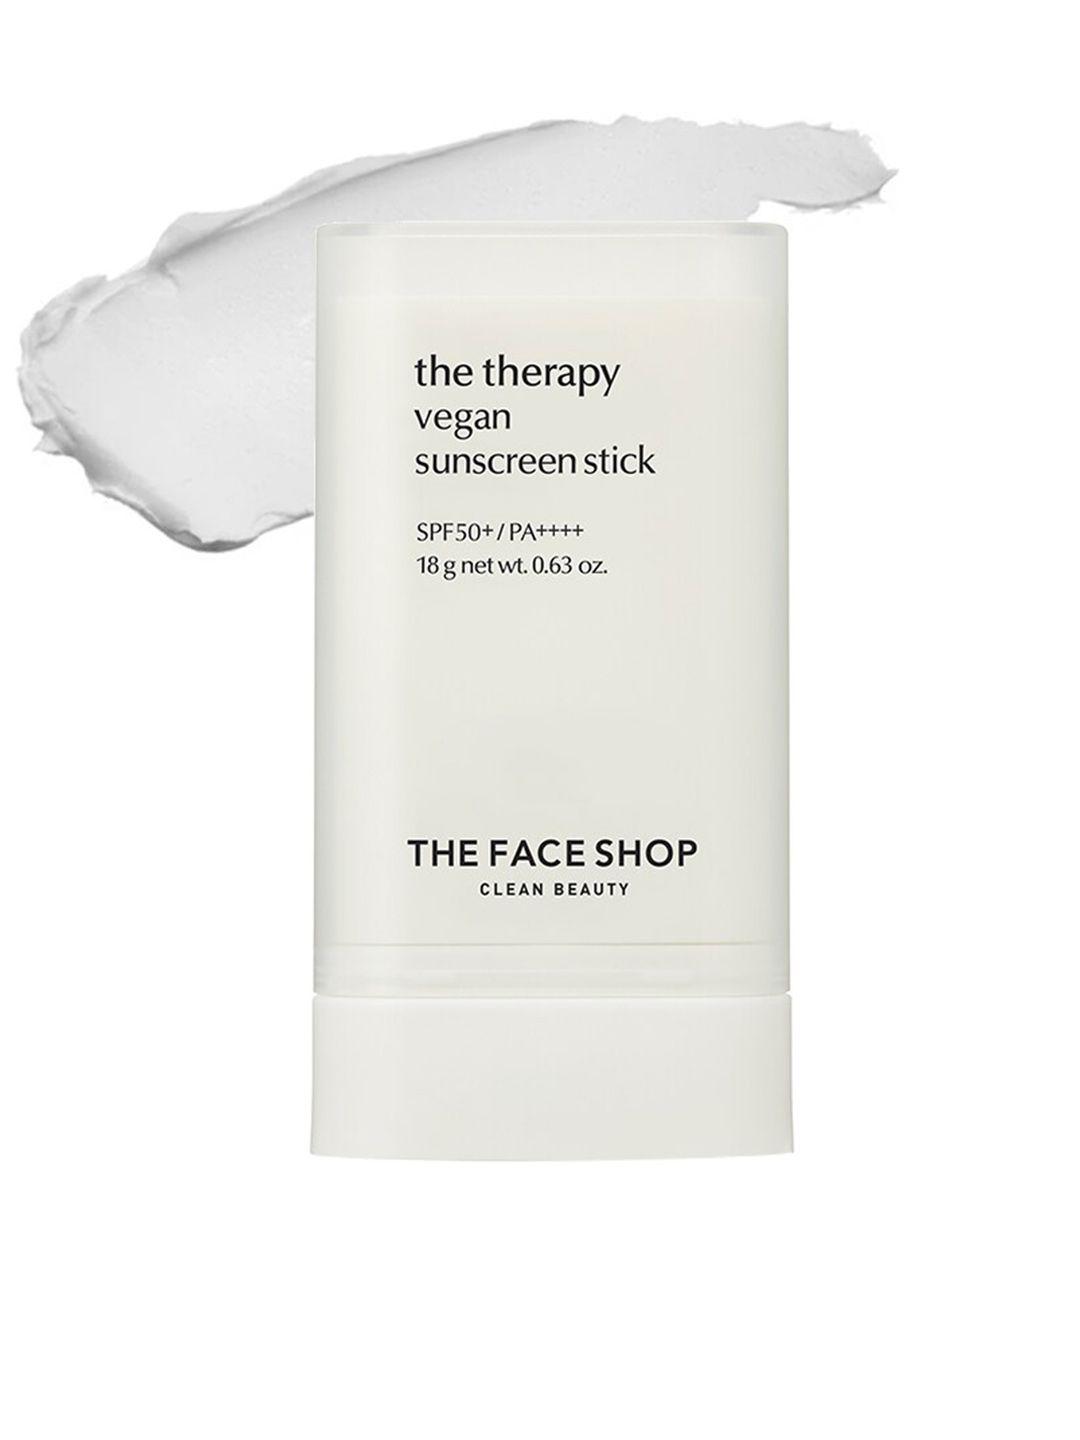 the face shop the therapy vegan sunscreen stick spf50+ - 18g